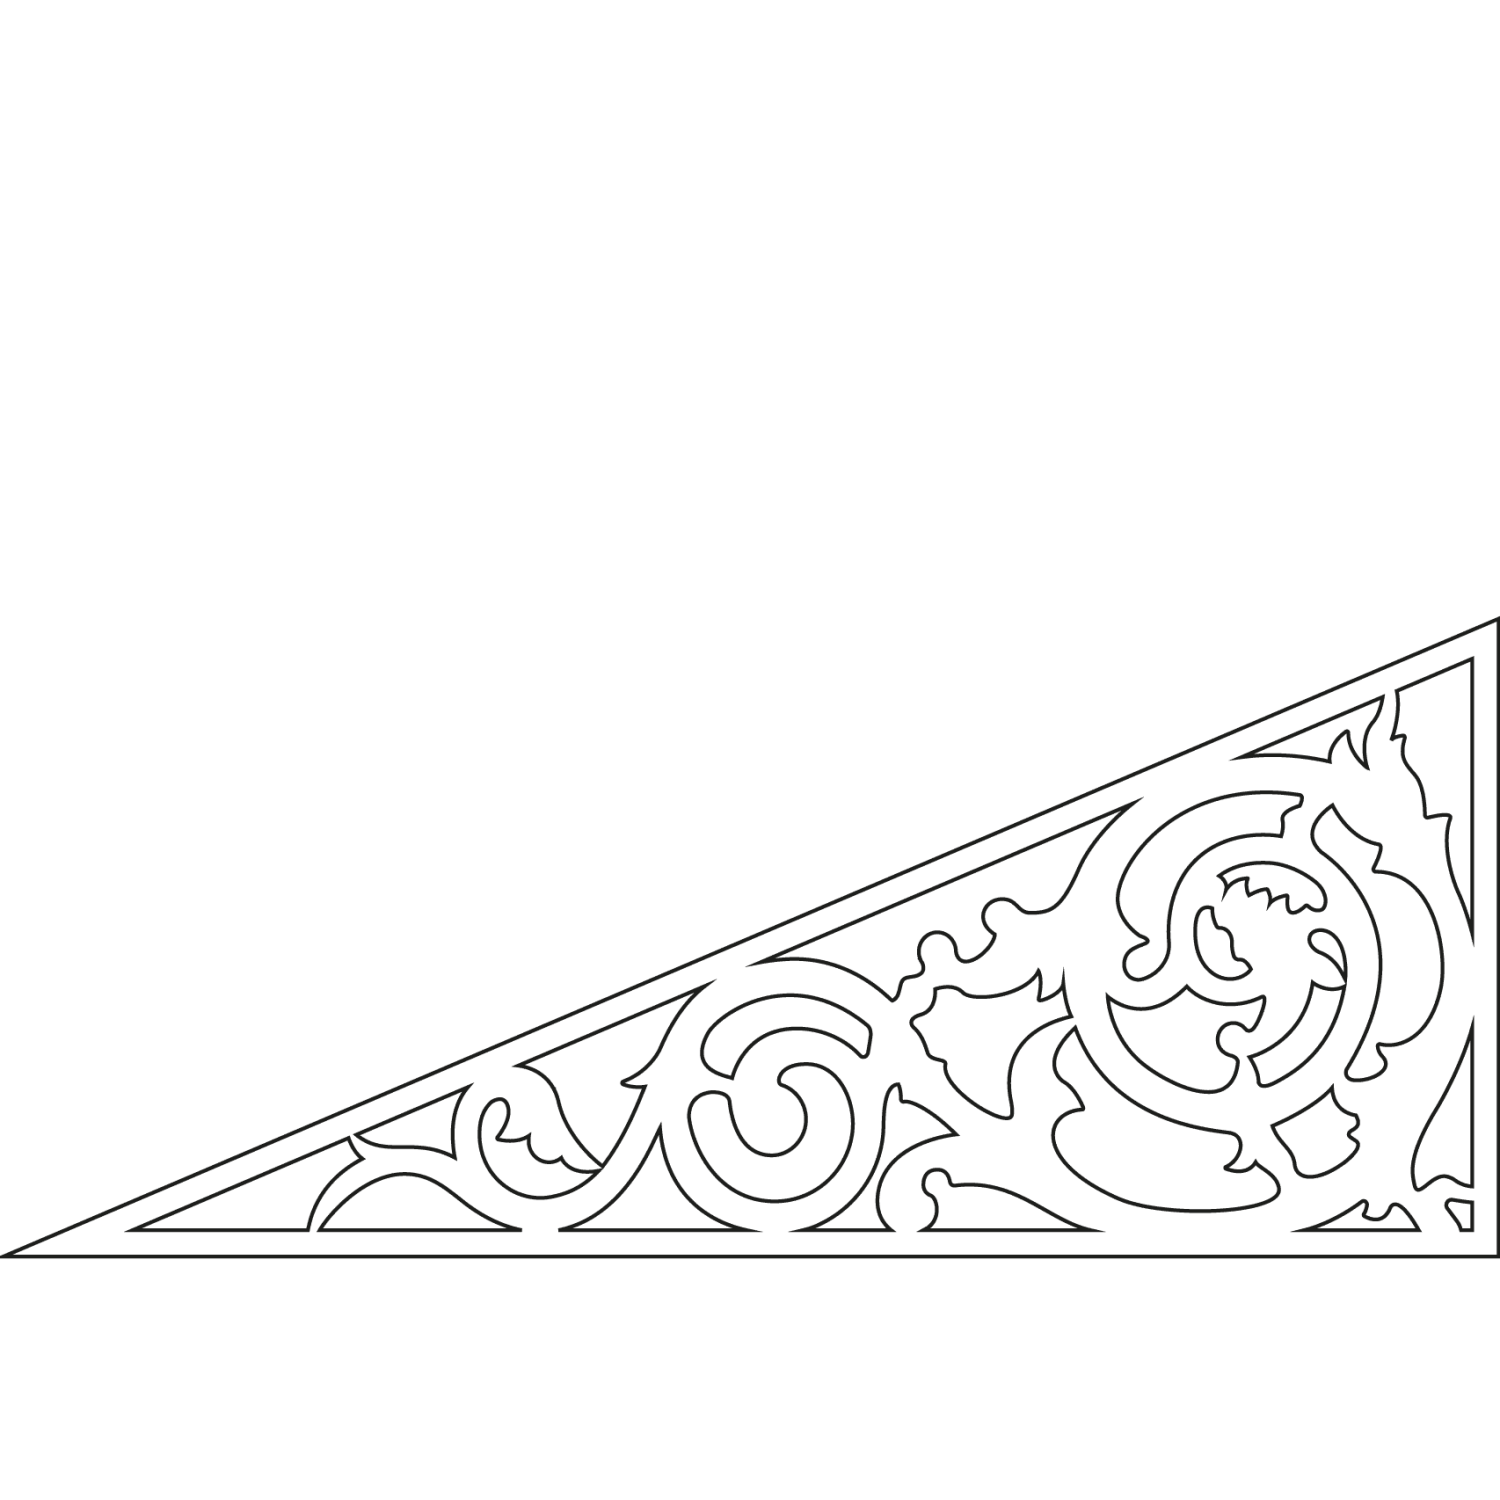 Gable infill 040 - Outline of a decorative victorian millwork as house decoration for roof and gable end